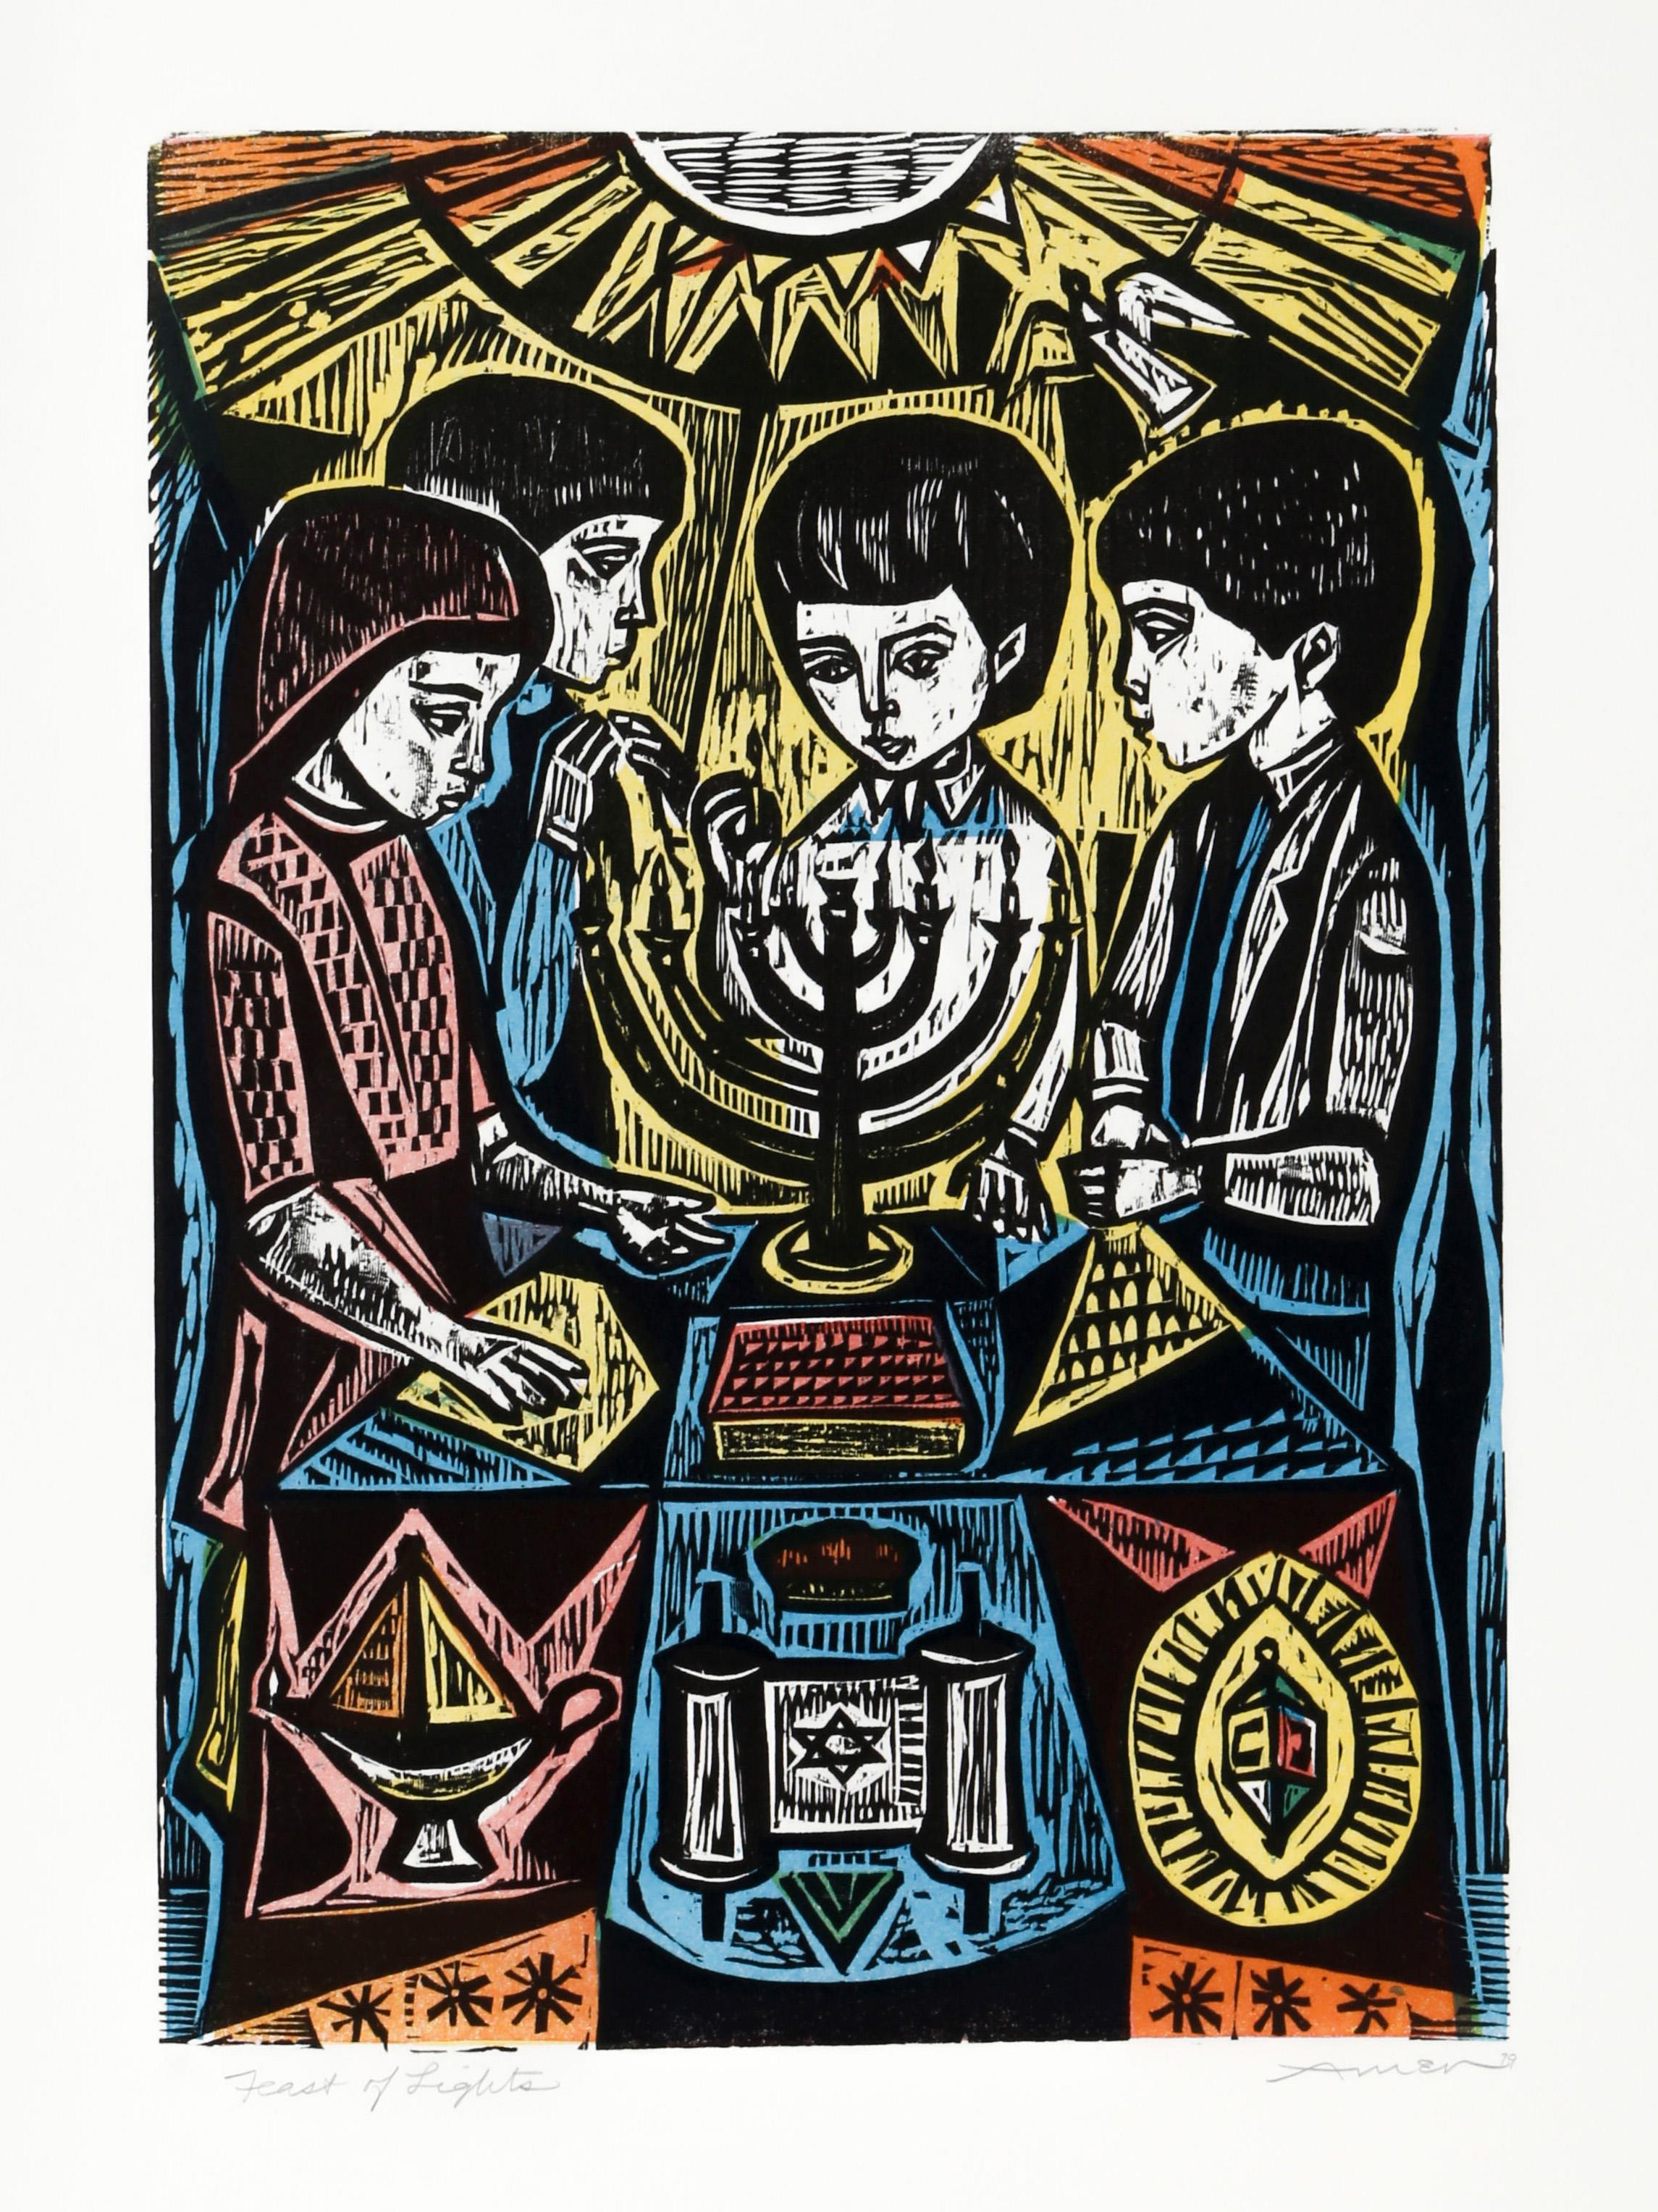 This tri-tone woodcut depicts children gathered around a menorah for Hannukah, the Jewish Festival of Lights. As it appears that all of the candles are lit, it is likely that this eighth and final night of the festival. Around them, other Judaica